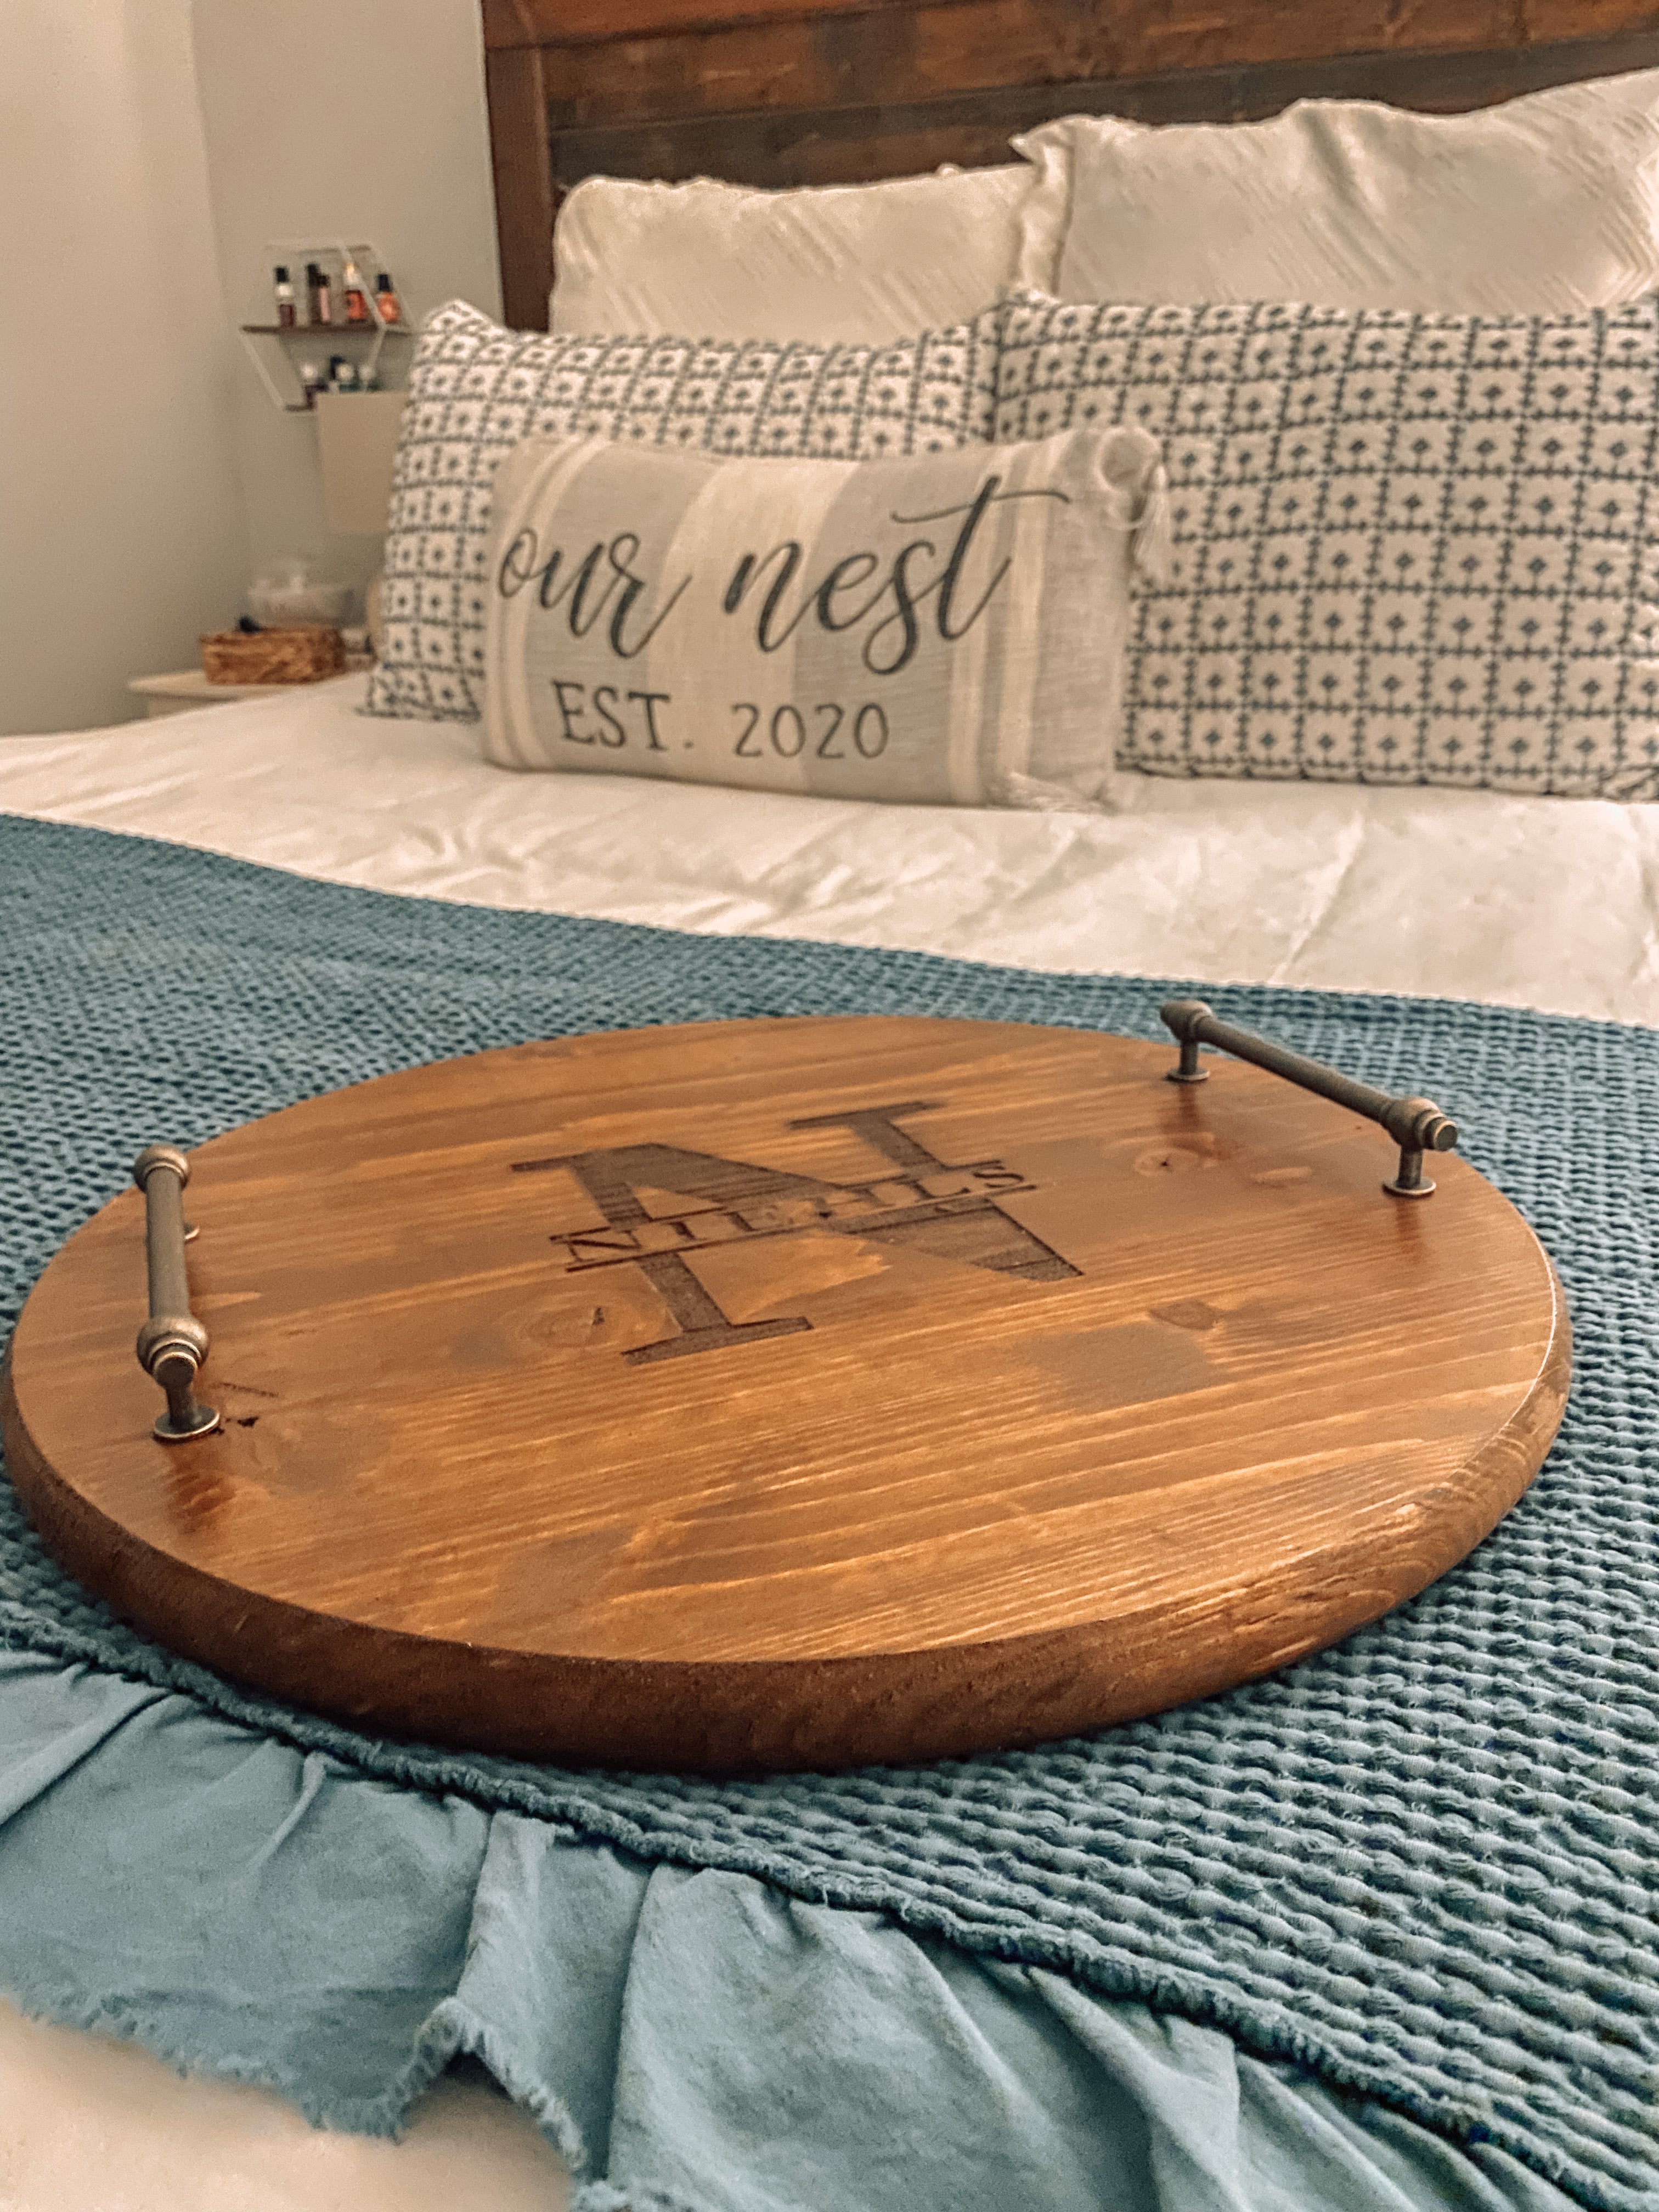 ROUND WOODEN SERVING TRAY